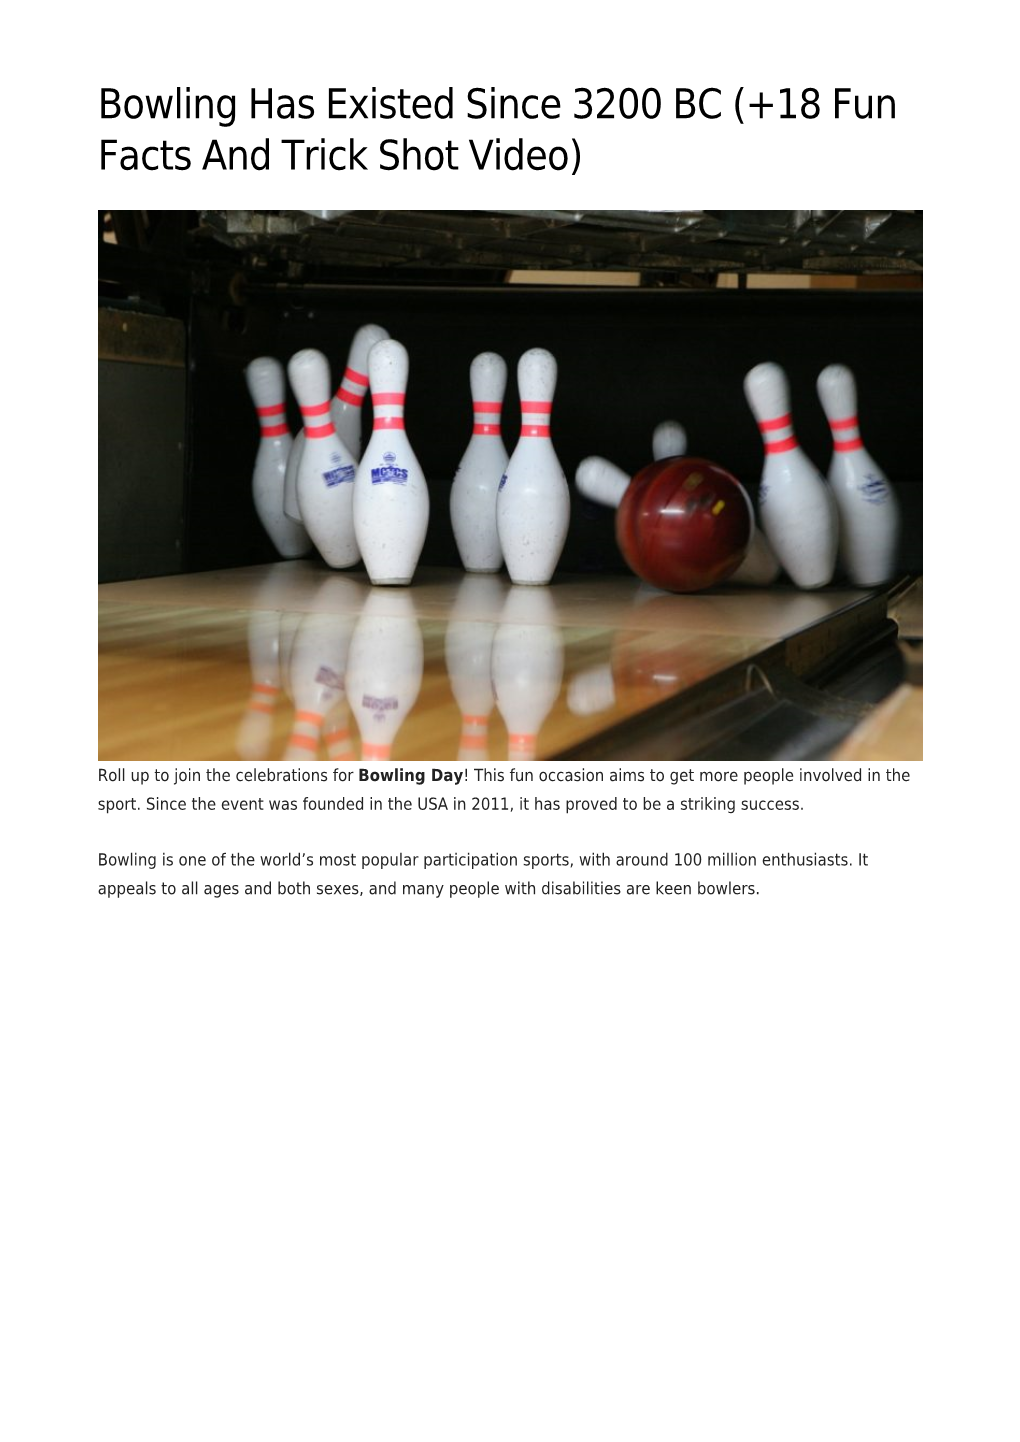 Bowling Has Existed Since 3200 BC (+18 Fun Facts and Trick Shot Video)